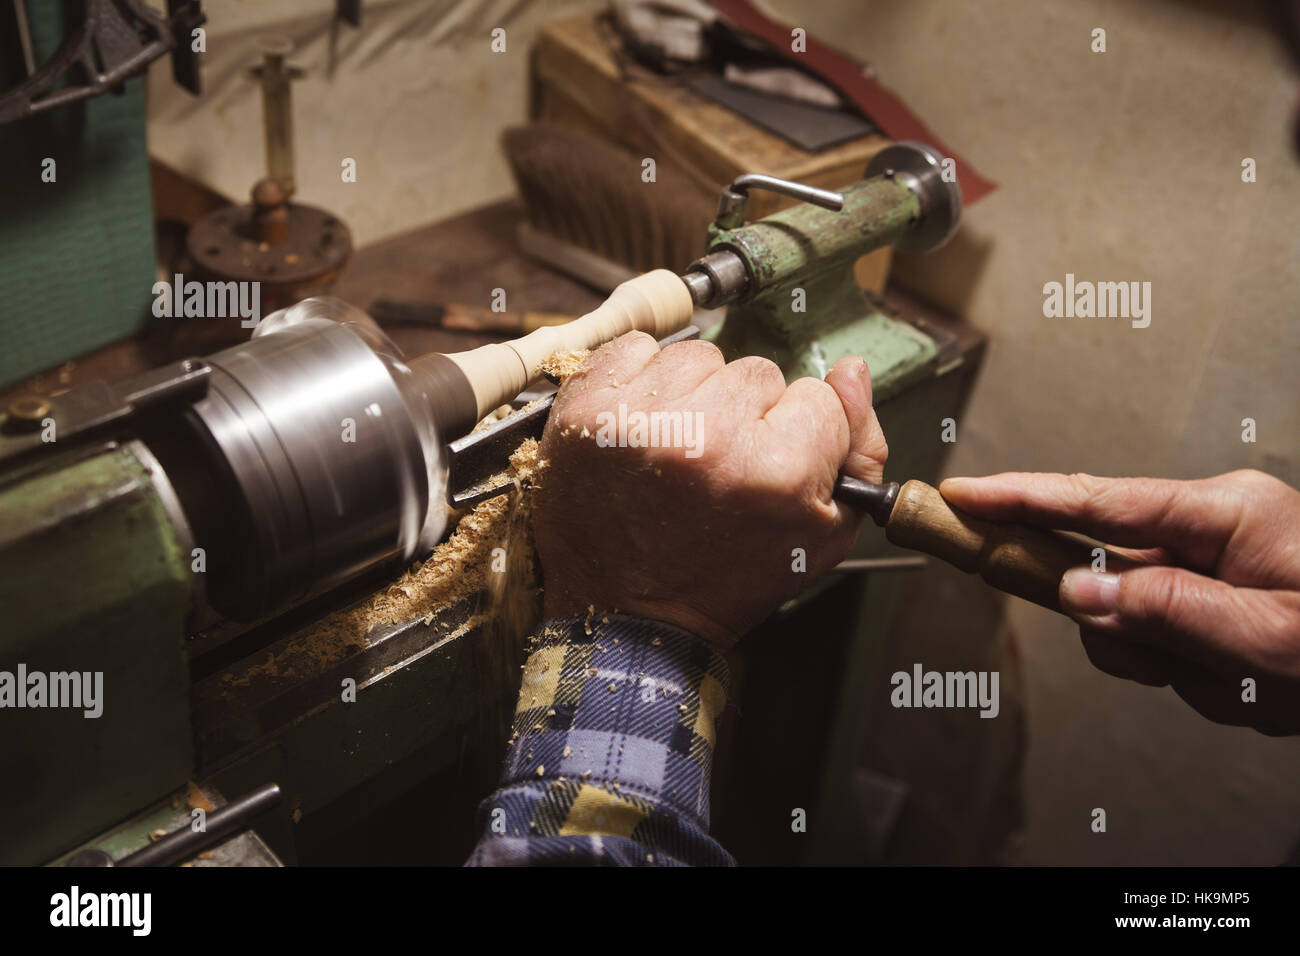 man's hands hold chisel near lathe Stock Photo